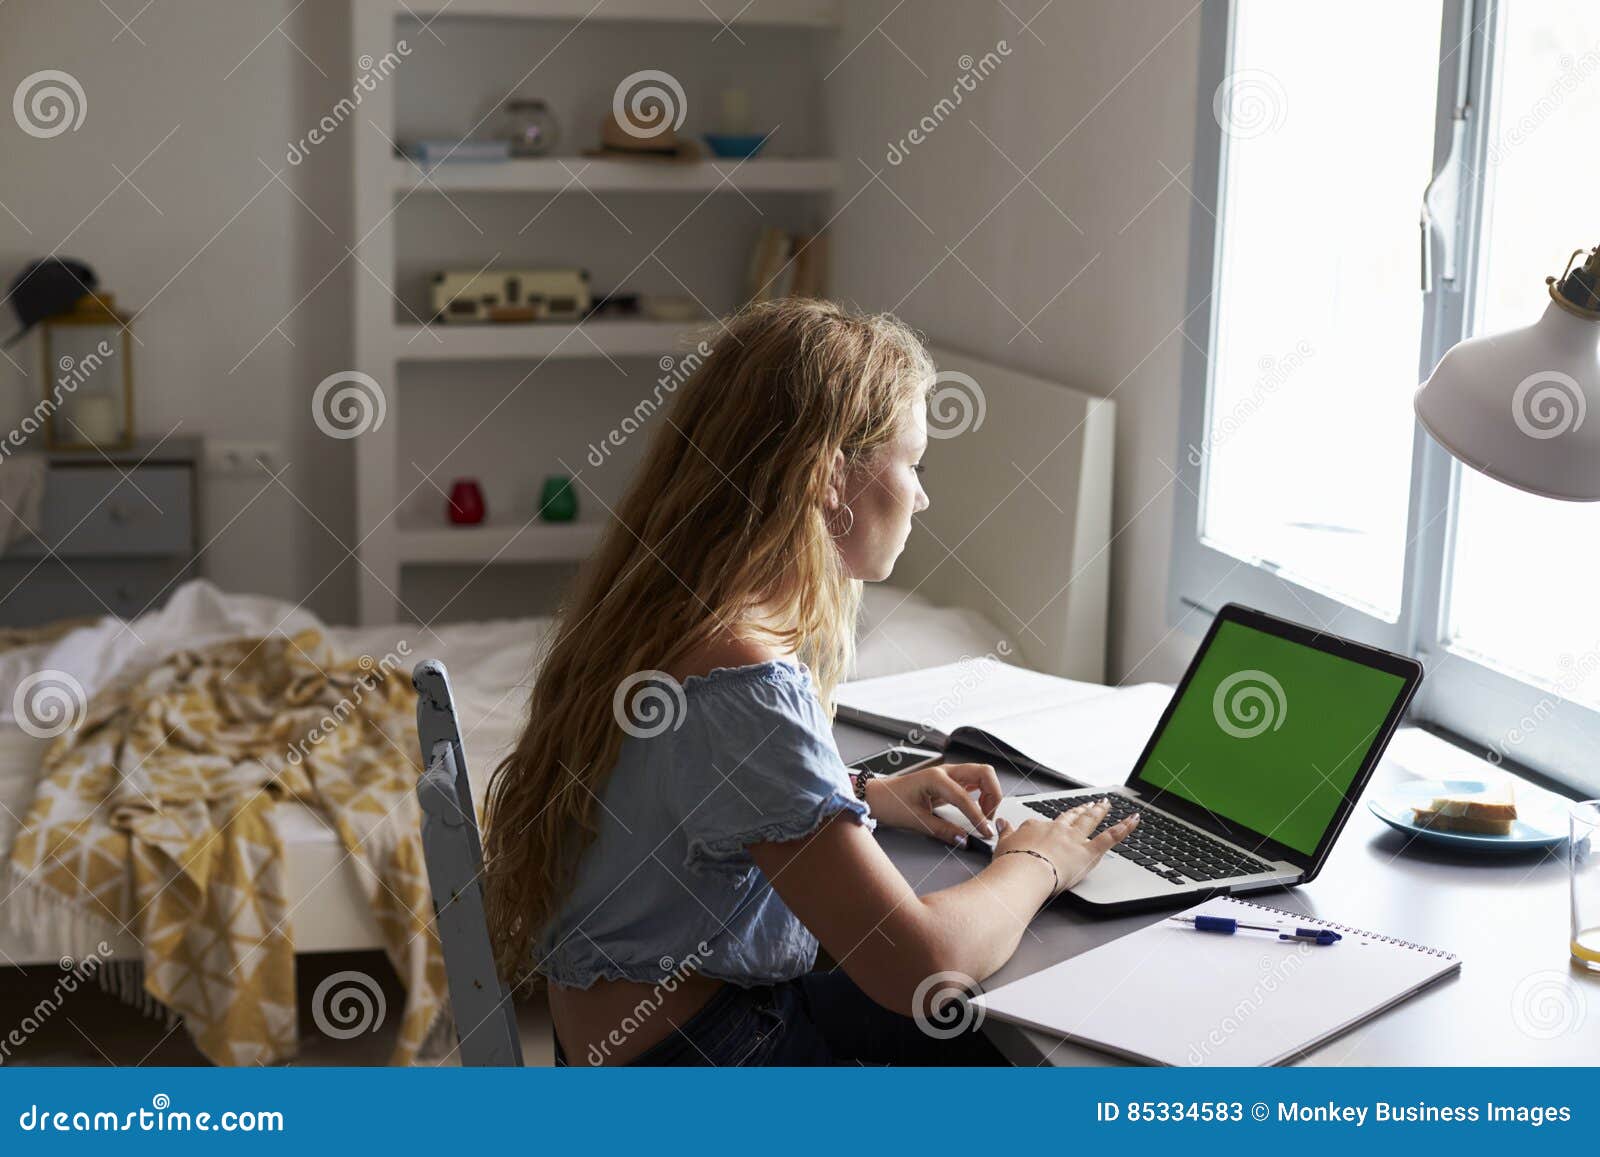 Teenage Girl Using Laptop Computer At A Desk In Her Bedroom Stock